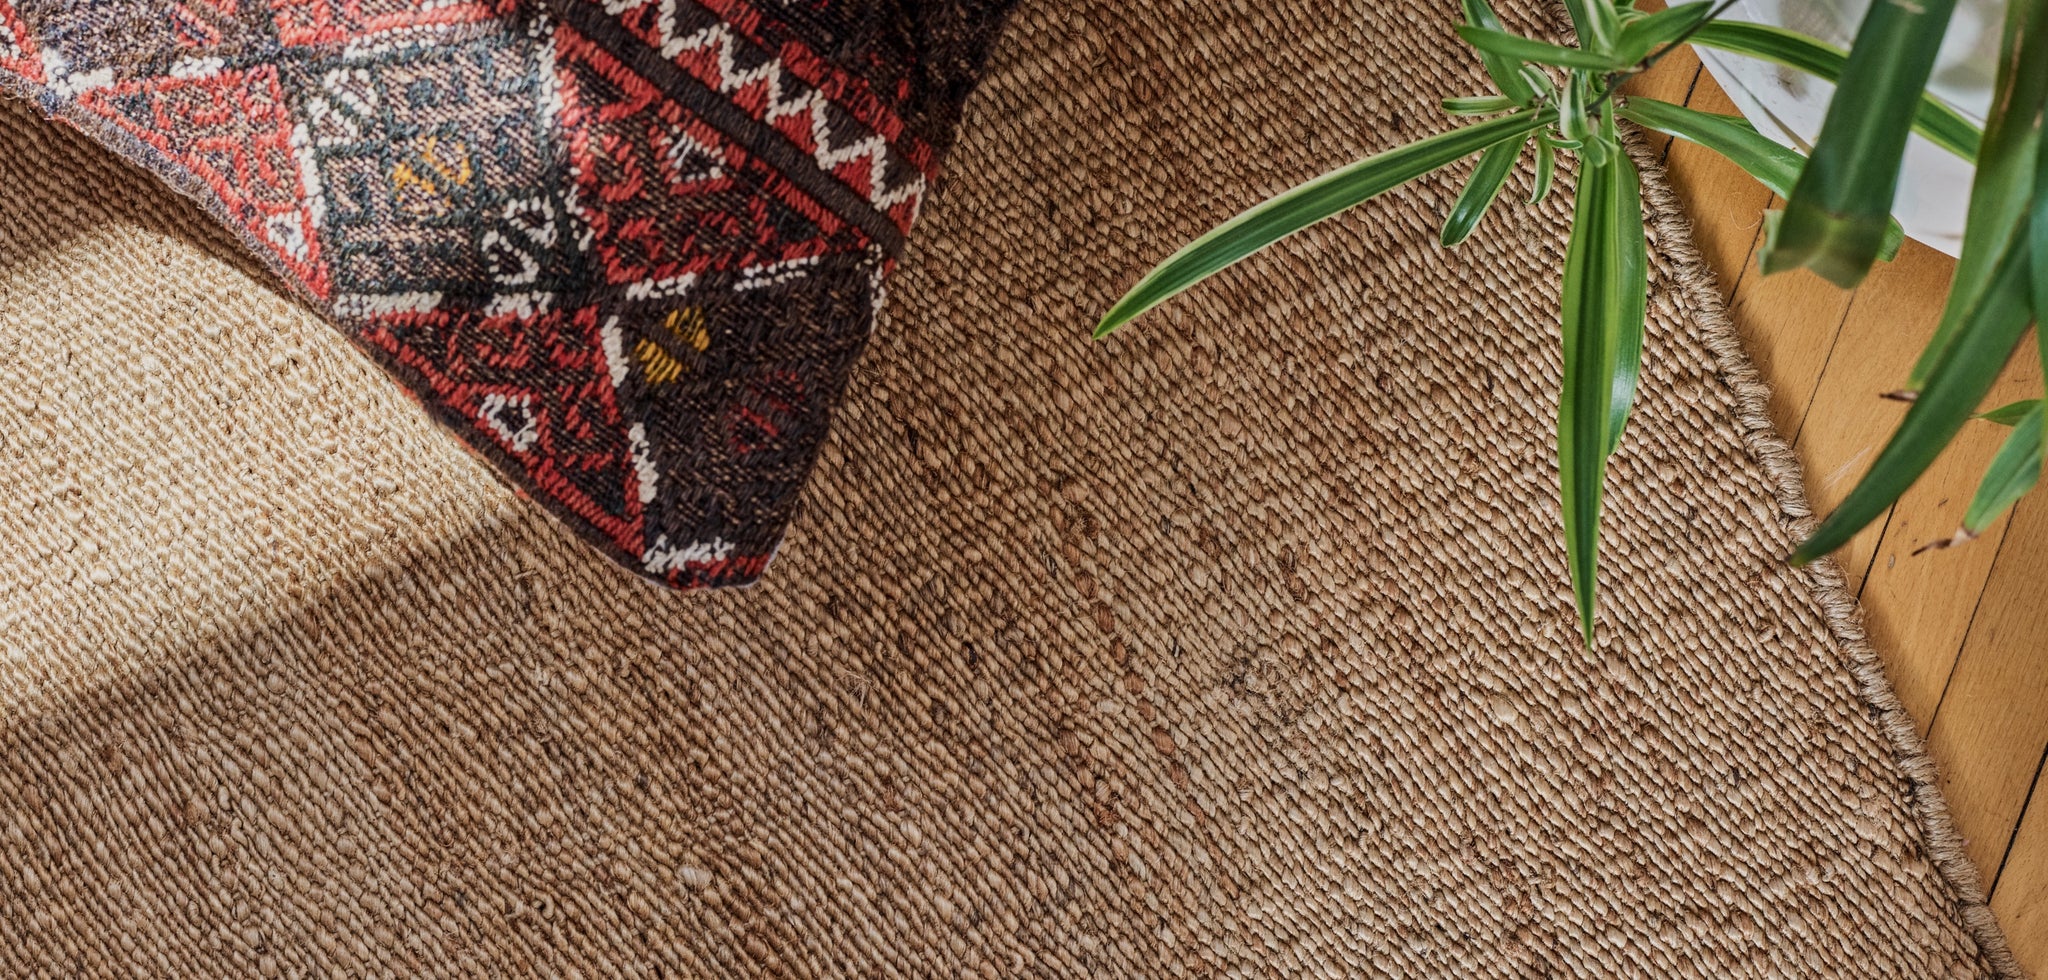 What is a Jute Rug? Jute Rug Decor & Care Tips